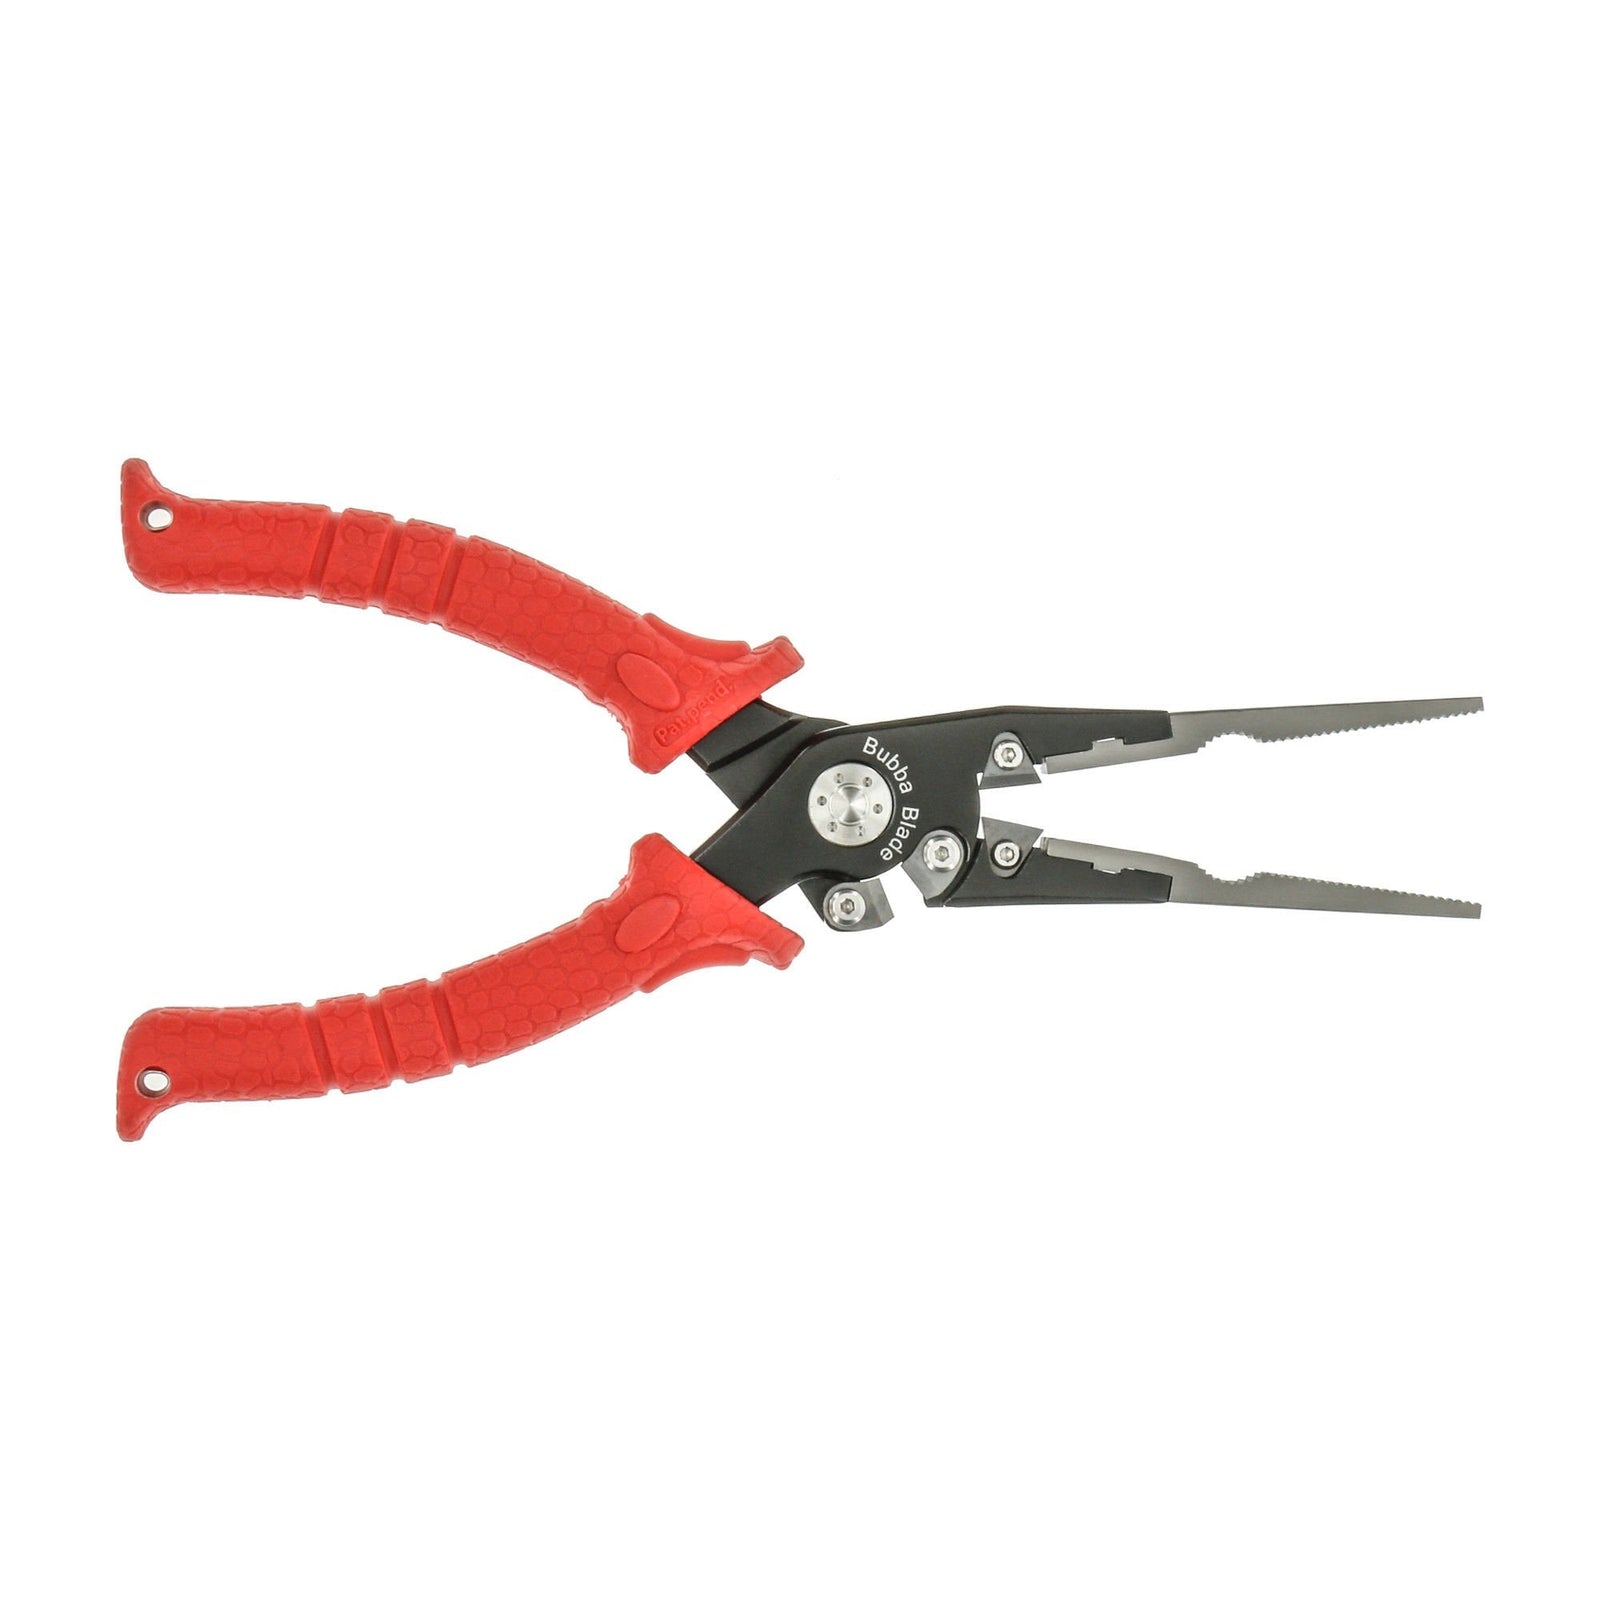 Bubba Pliers Tagged Bubba Pliers - CHAOS Fishing